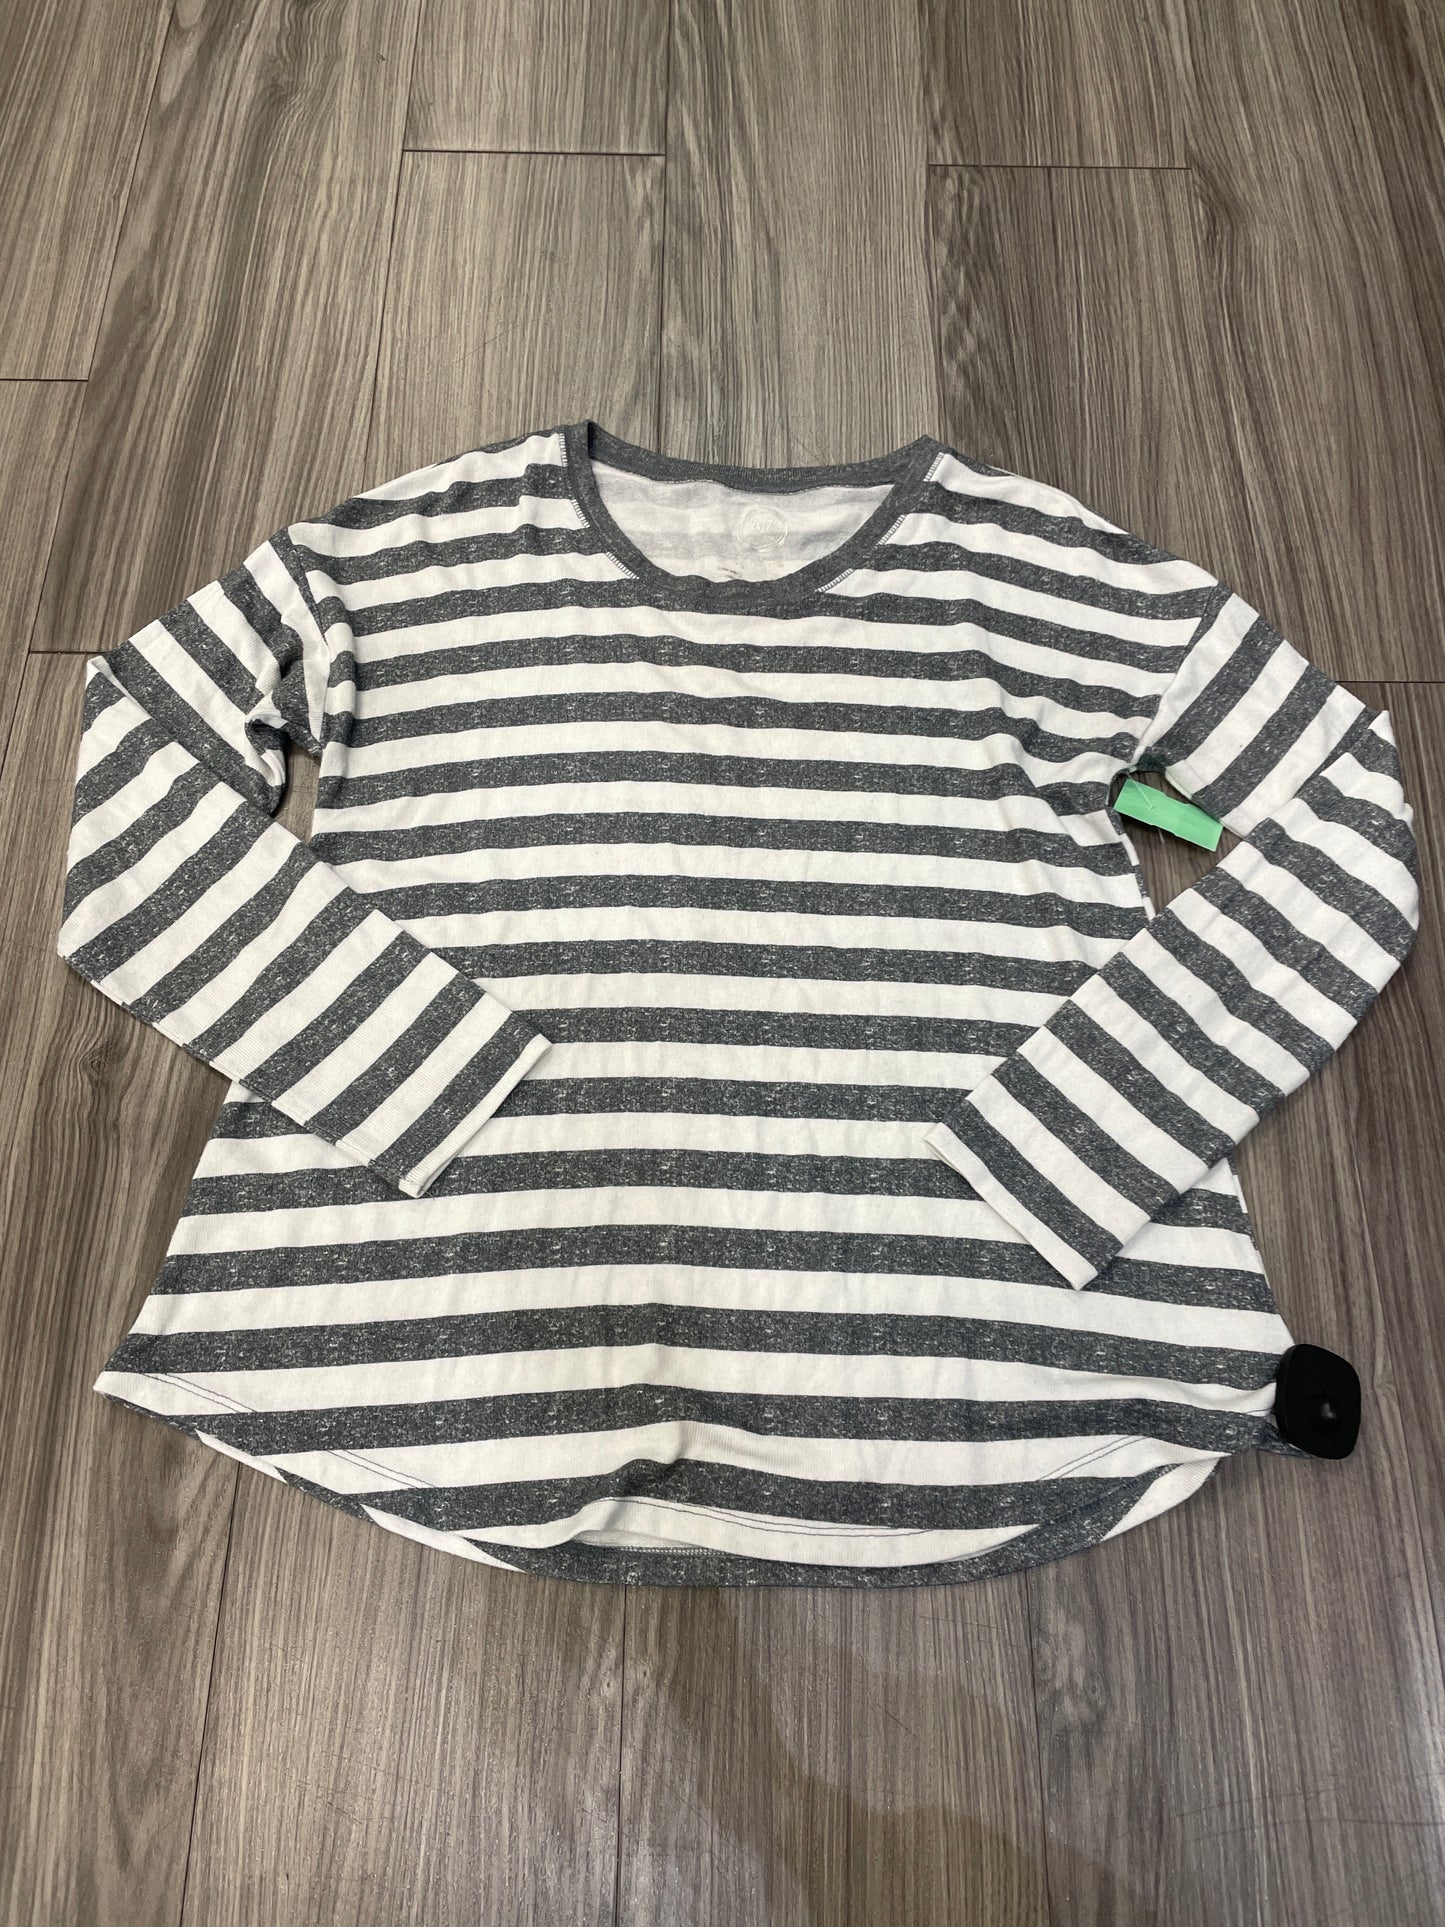 Striped Pattern Top Long Sleeve Maurices, Size S